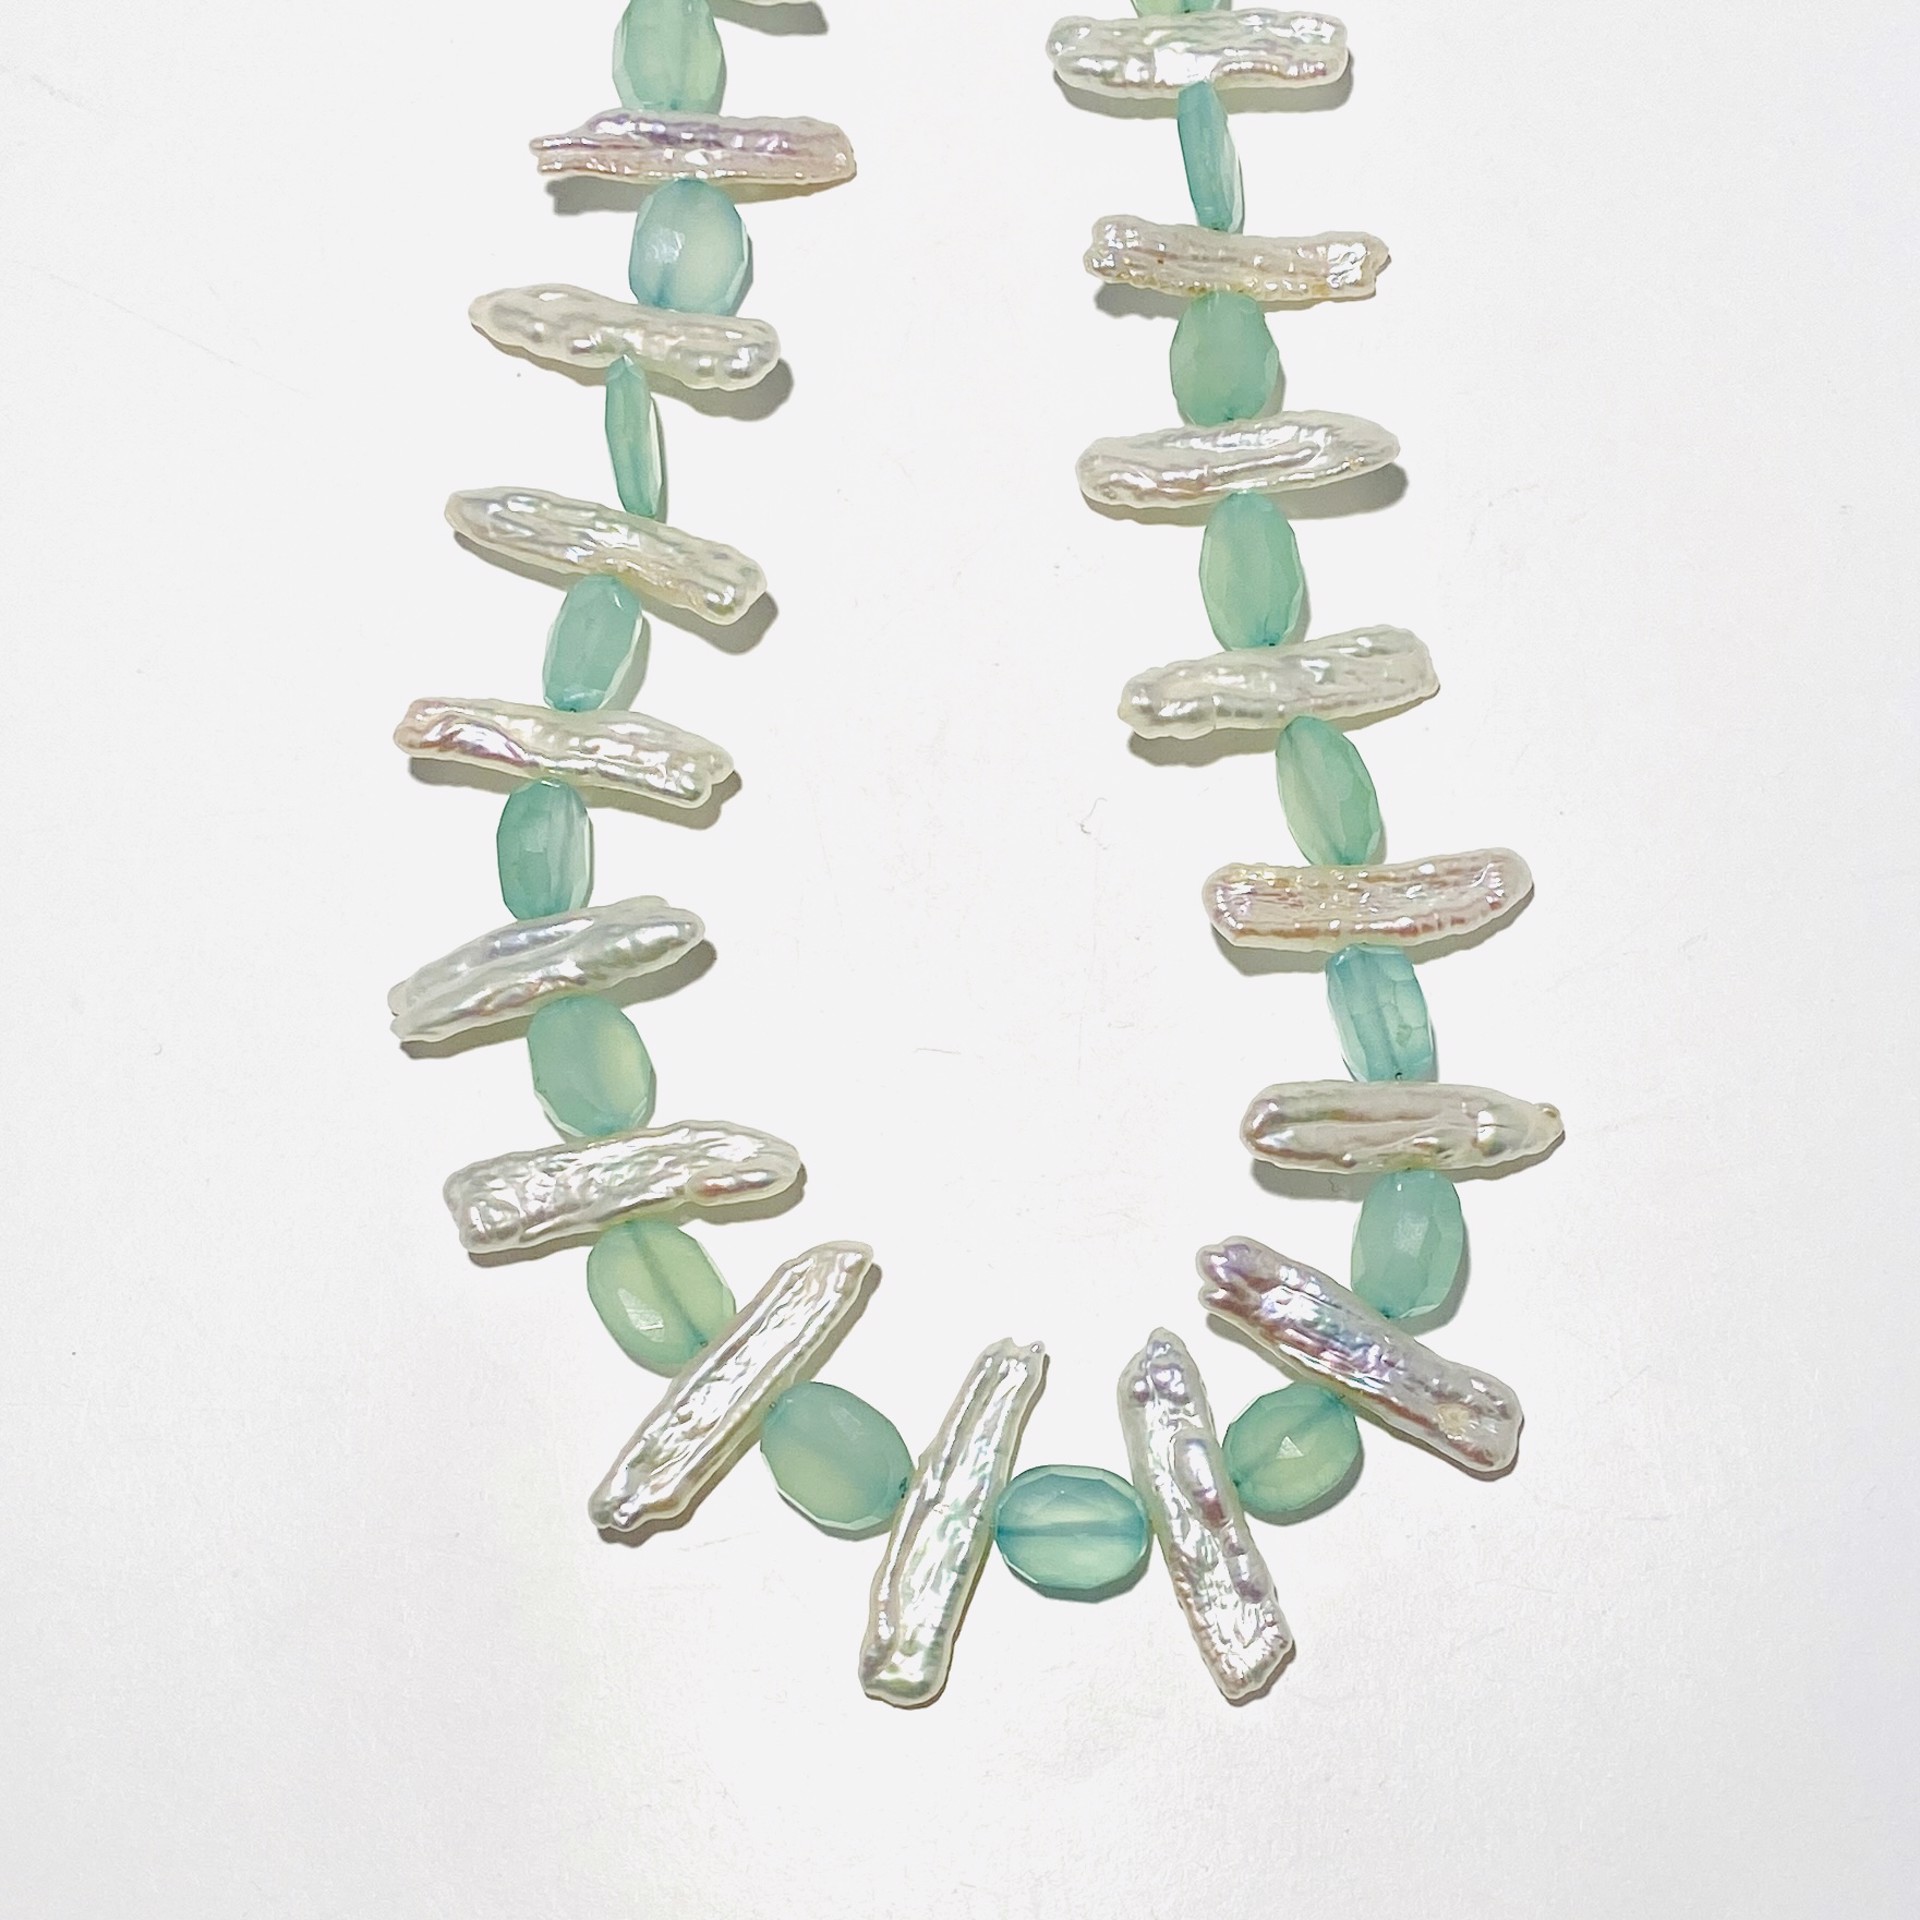 White Biwa Pearl Faceted Oval Seafoam Chalcedony Collar Necklace by Nance Trueworthy